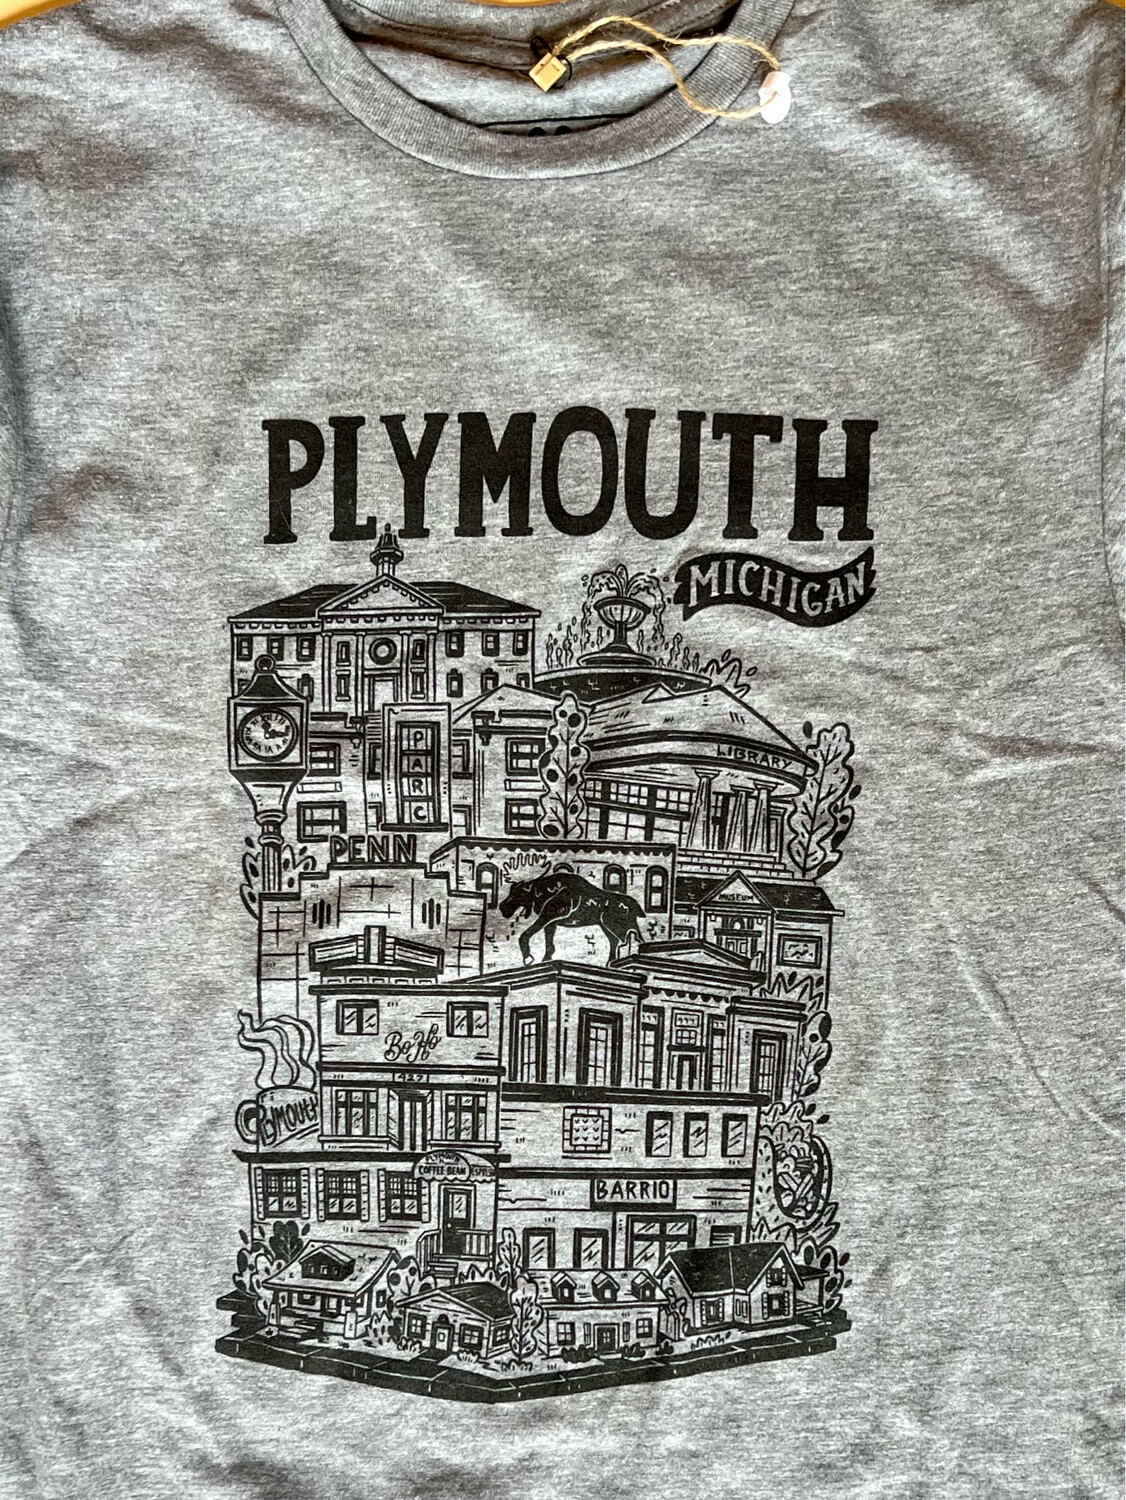 Plymouth Mich Tee